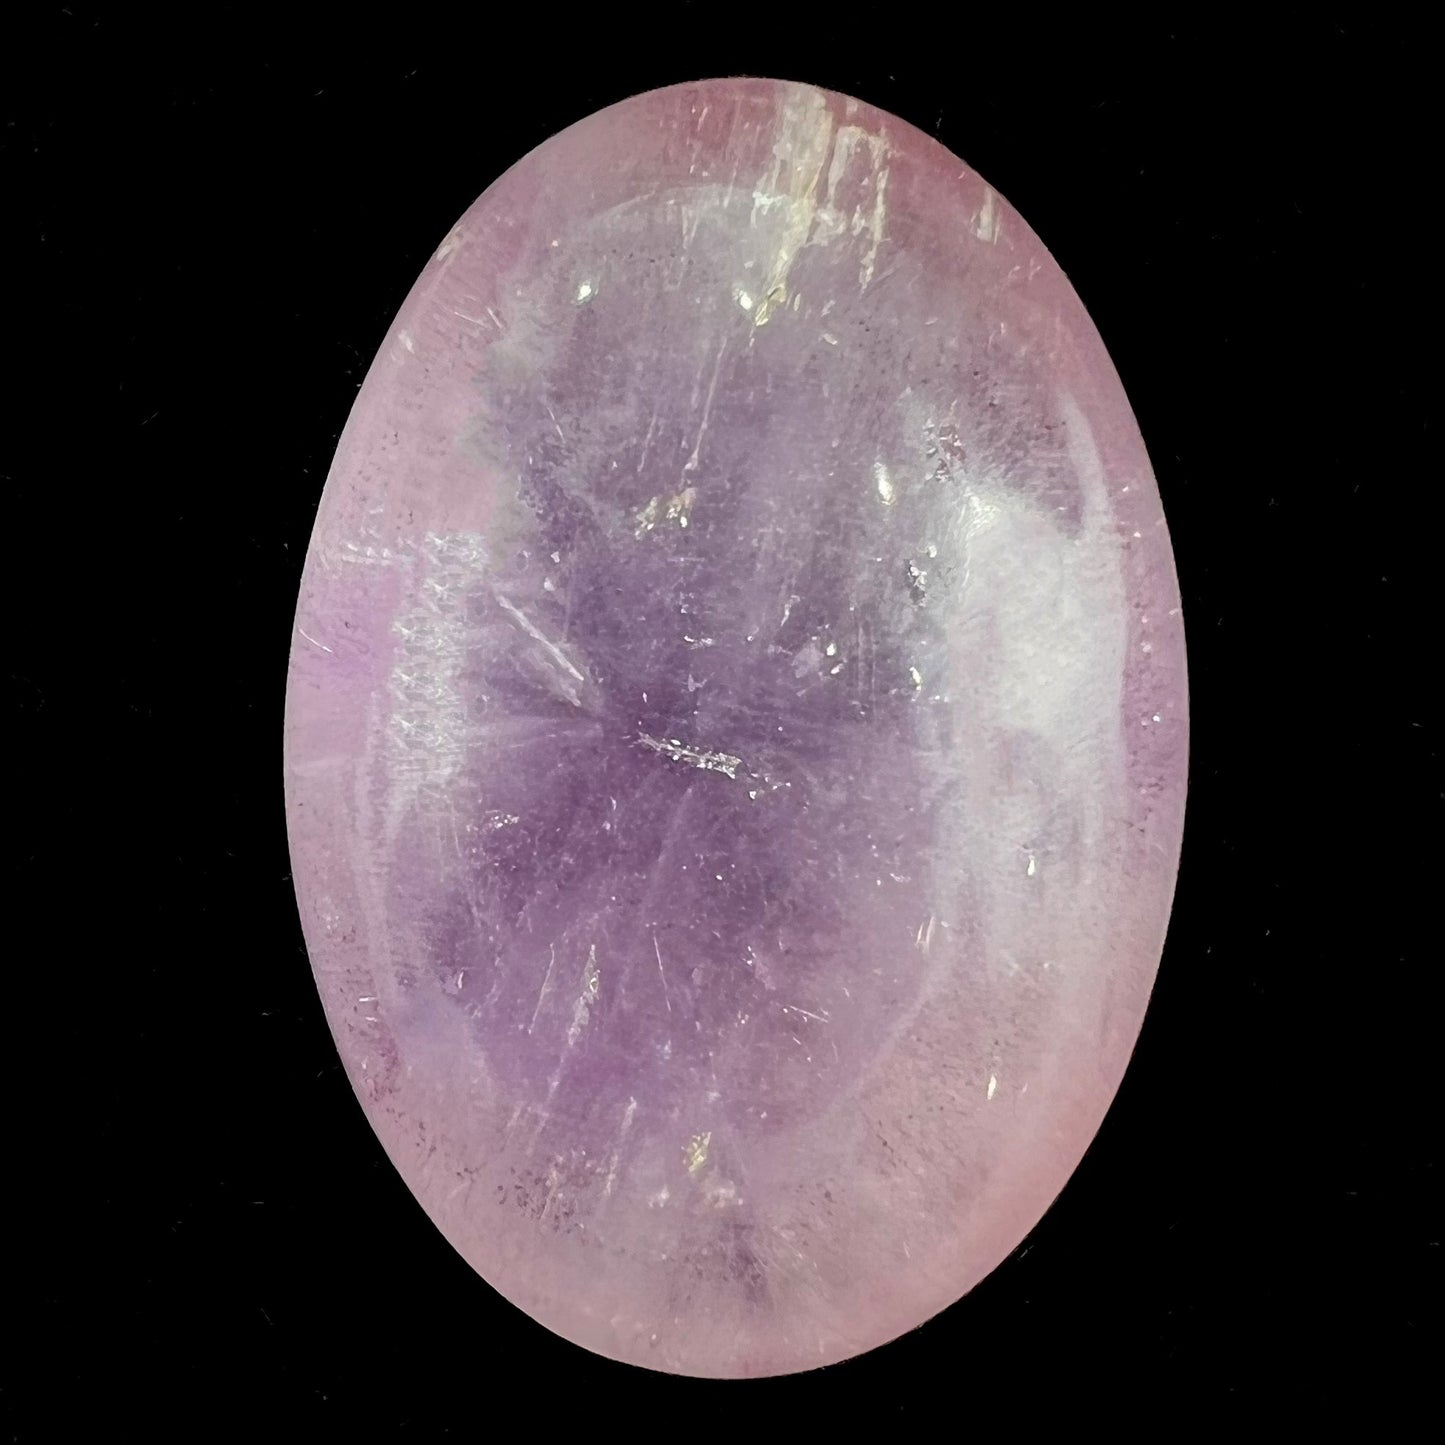 A cabochon cut red amethyst stone from Mexico.  The piece shows a faint star.